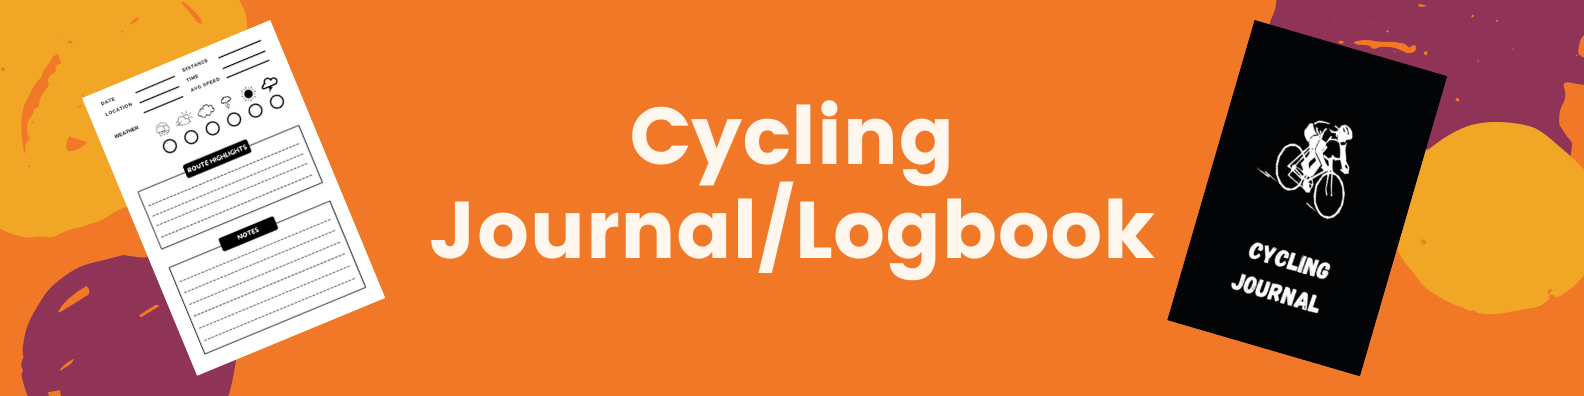 cycling logbook banner